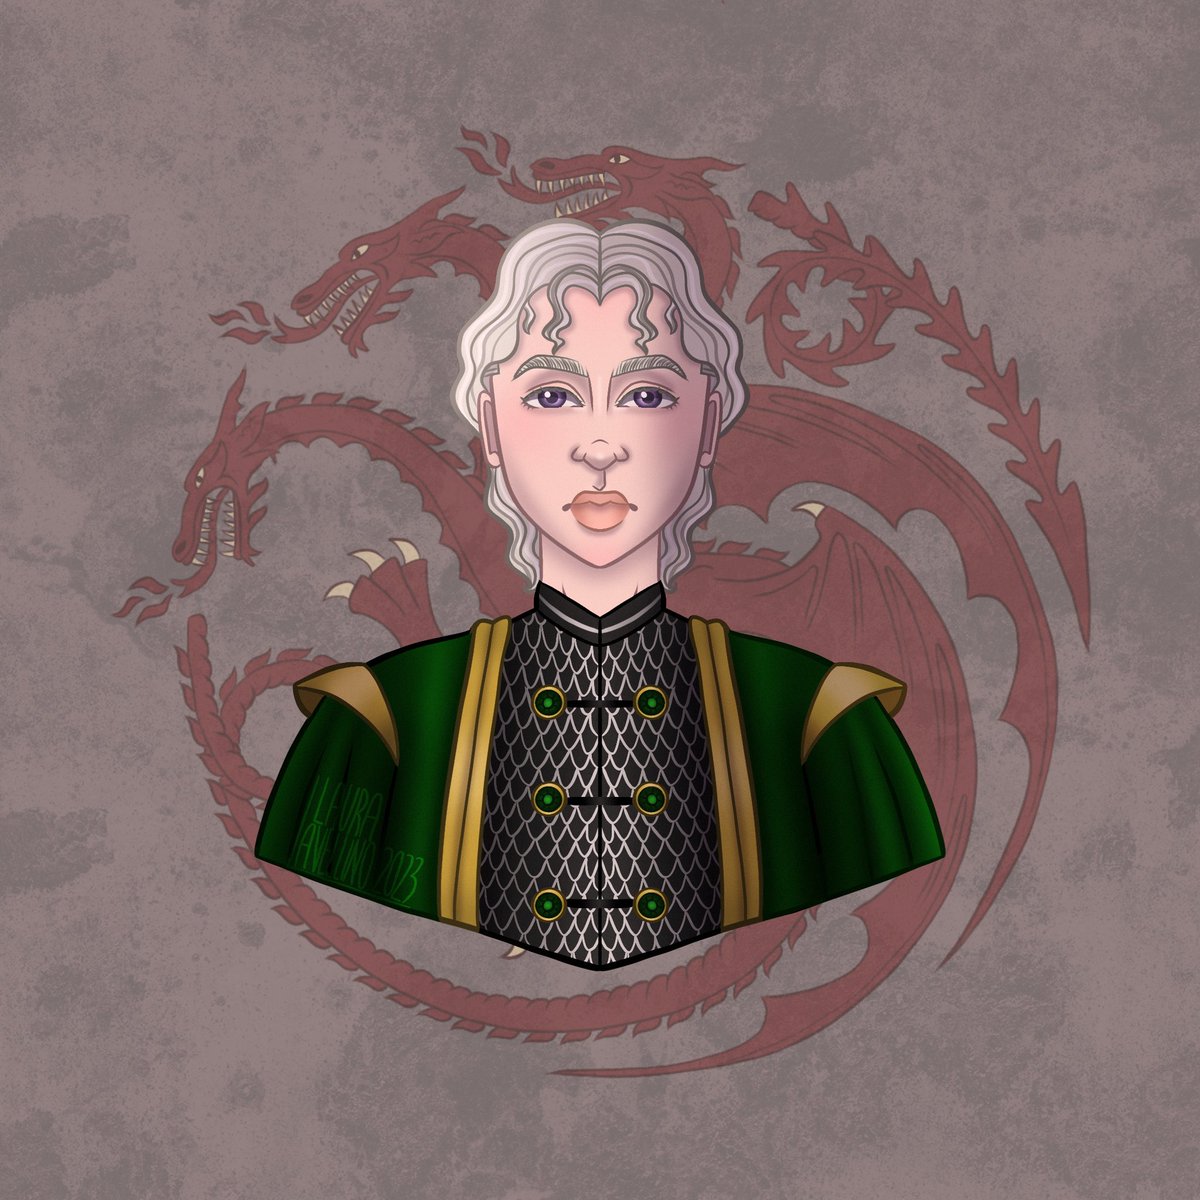 🩸Prince Jaehaerys Targaryen 🐉

“ [he] was… less perfect than was expected of a Targaryen princeling, boasting six fingers on his left hand, and six toes upon each foot.”

#JaehaerysTargaryen
#HouseTargaryen
#FireandBlood